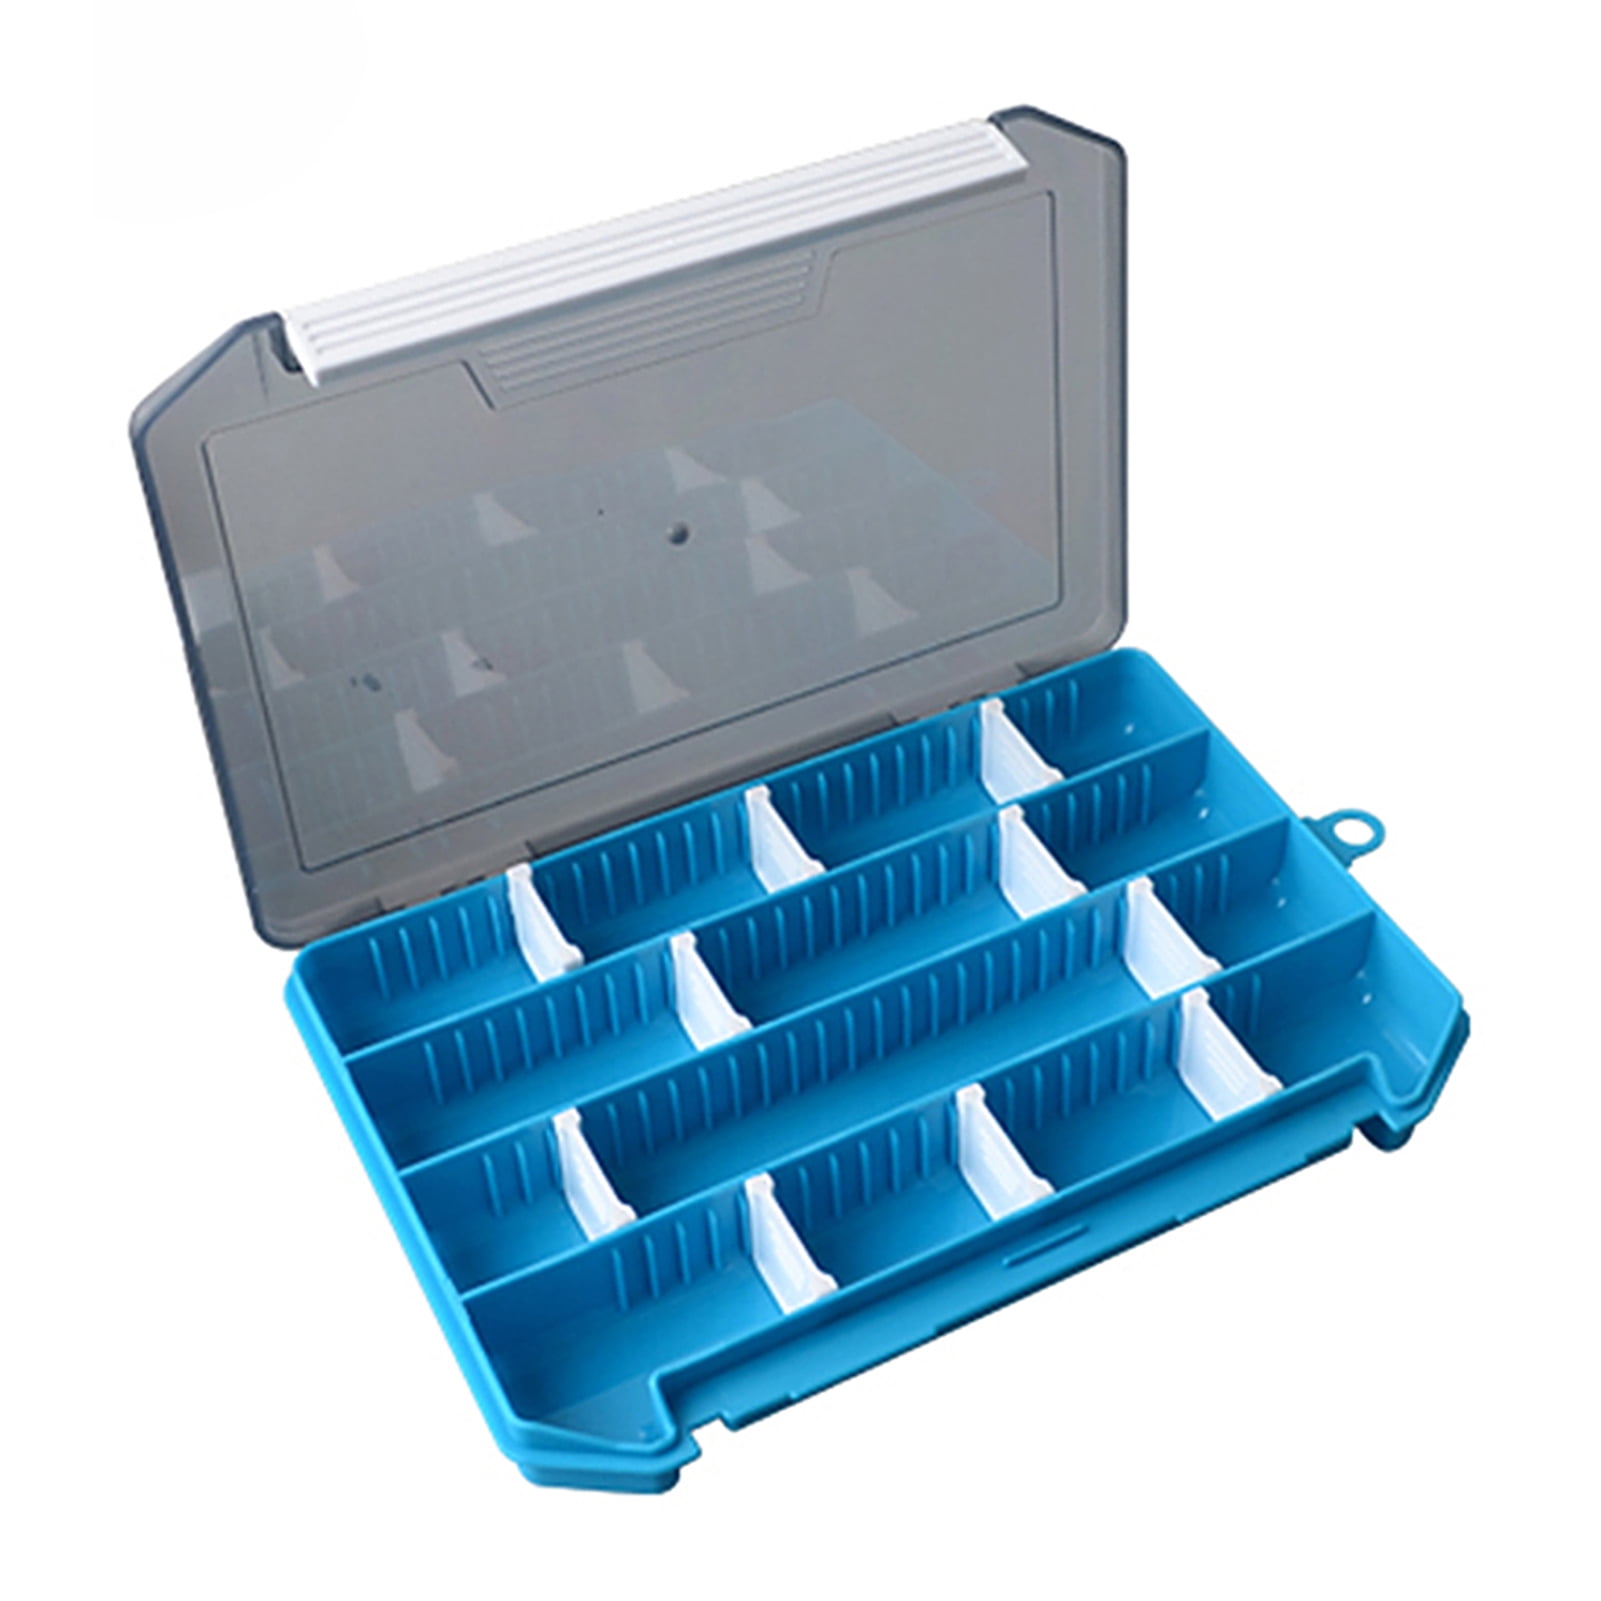 ilure Fishing Tackle Box Storage Trays with Removable Dividers